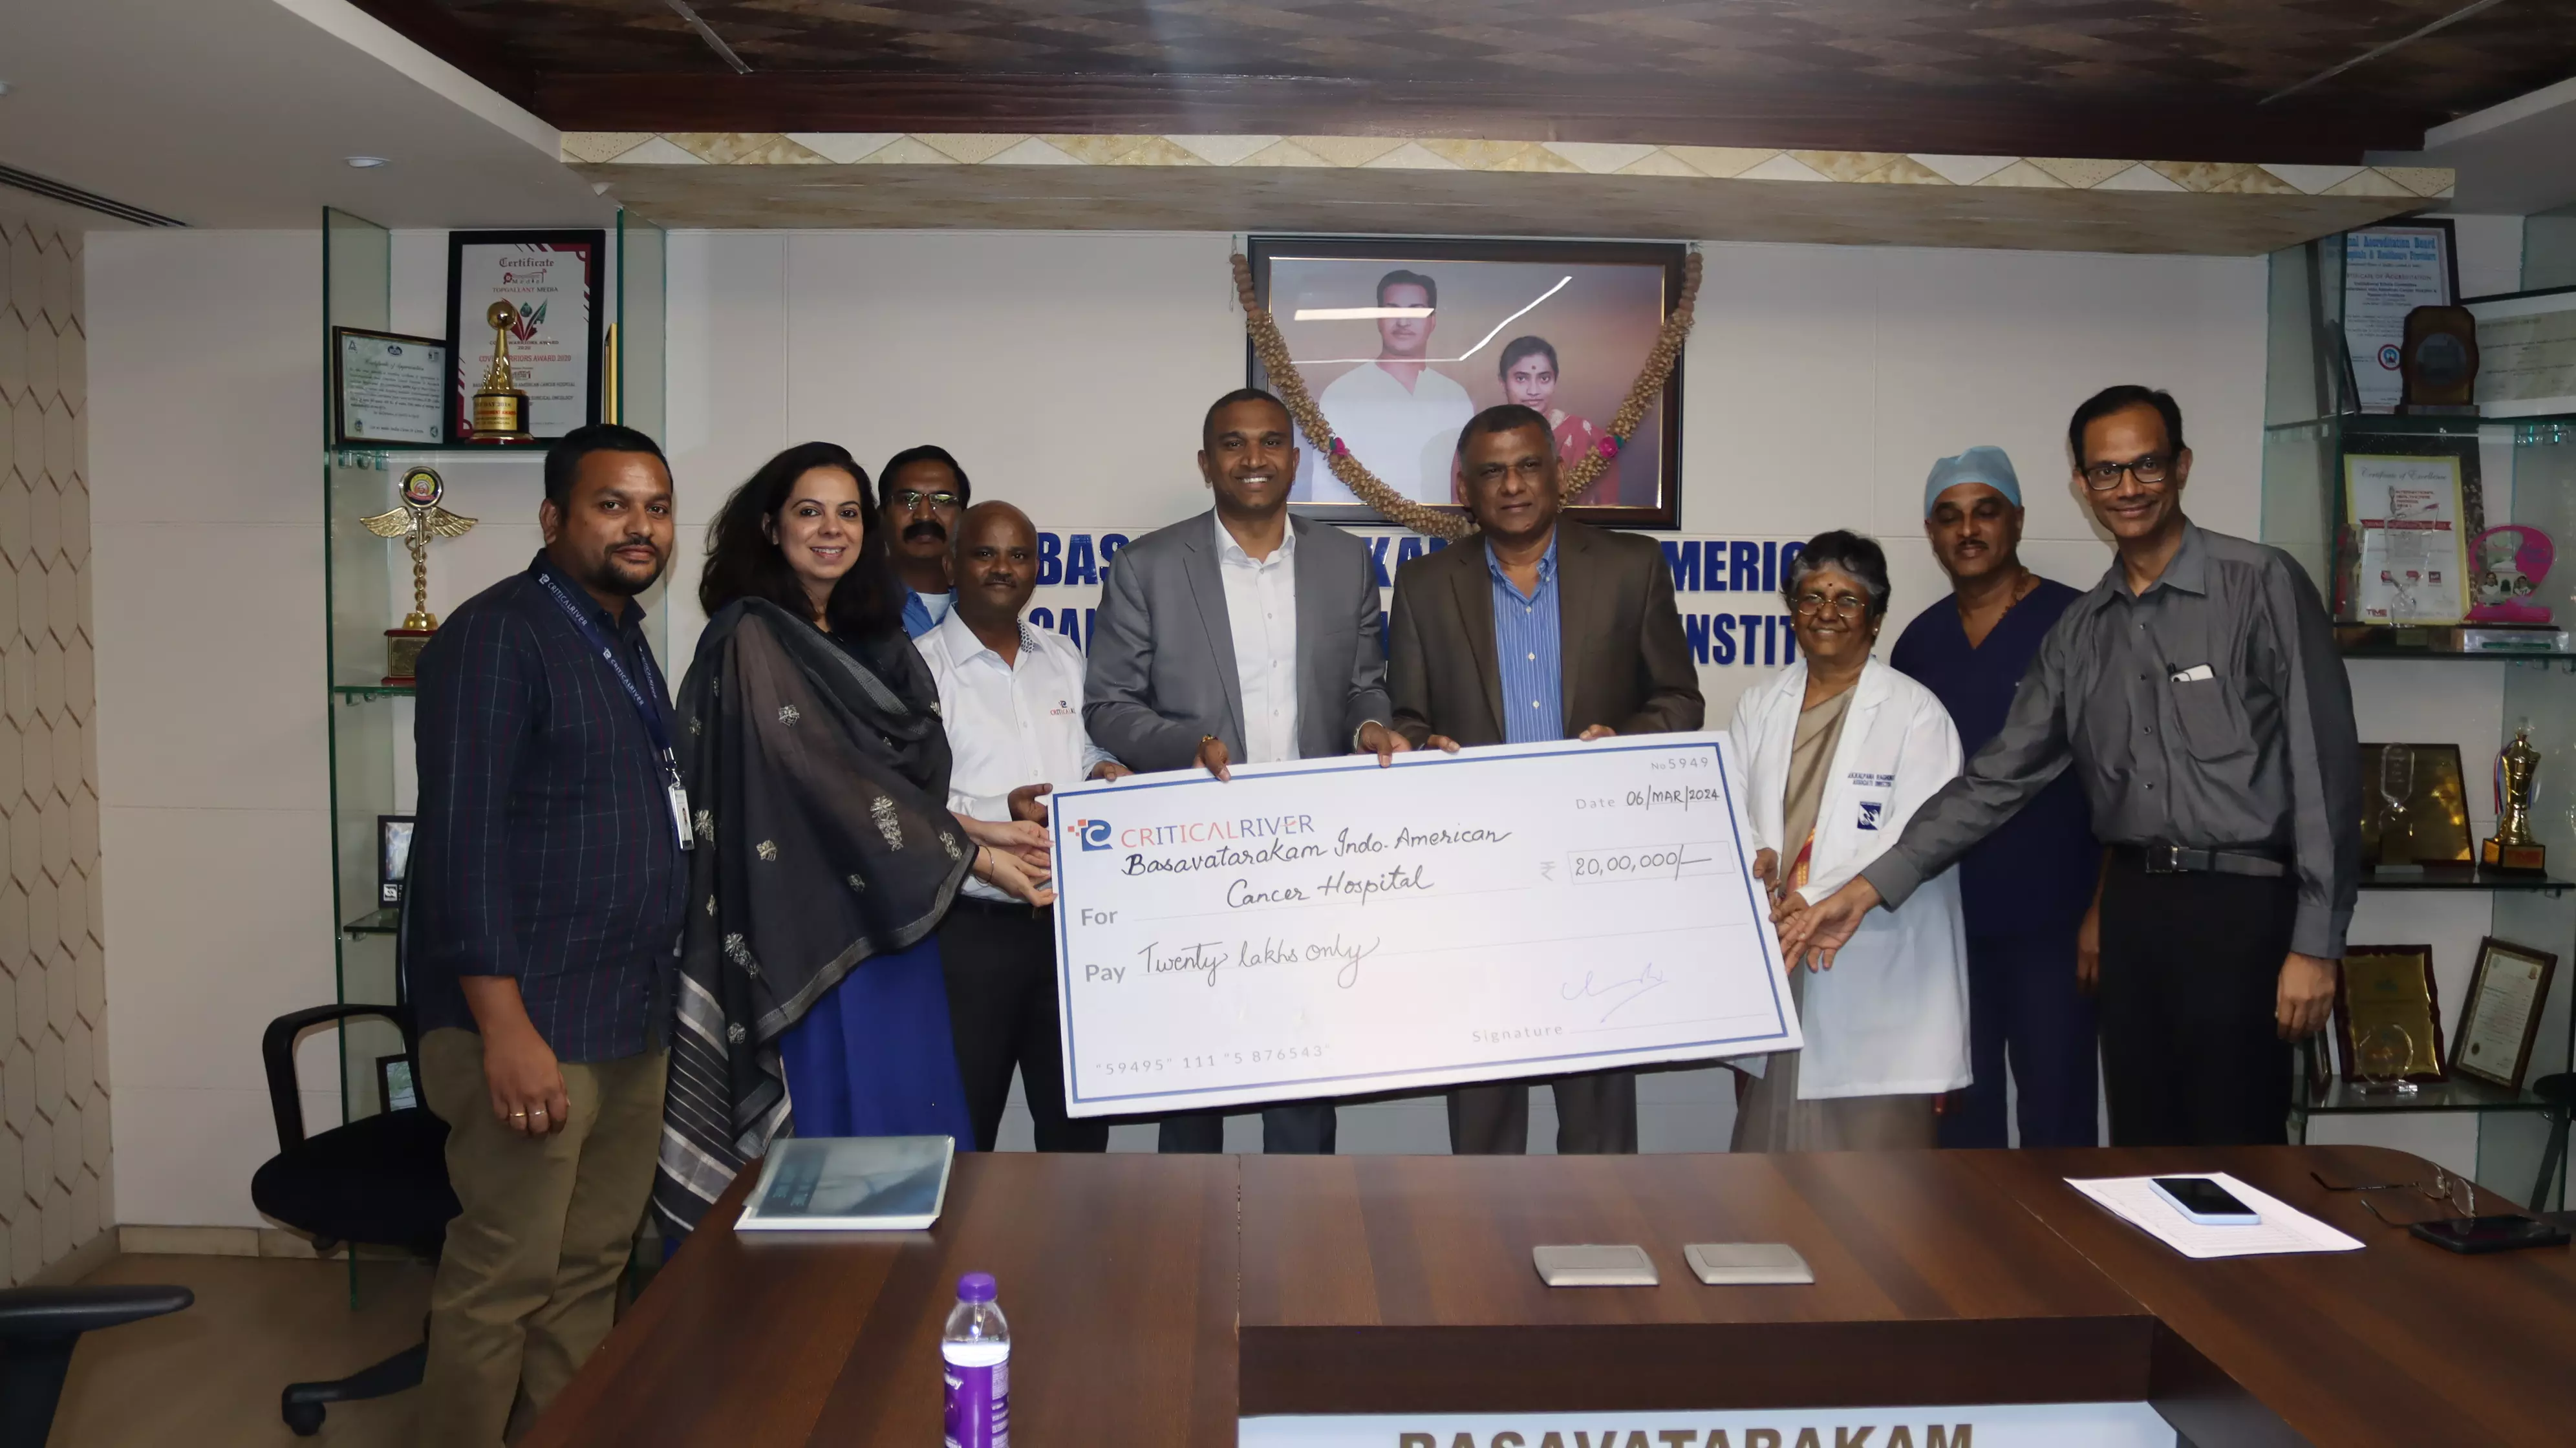 CriticalRiver partners with Basvatarakam Cancer Hospital to promote early cancer detection